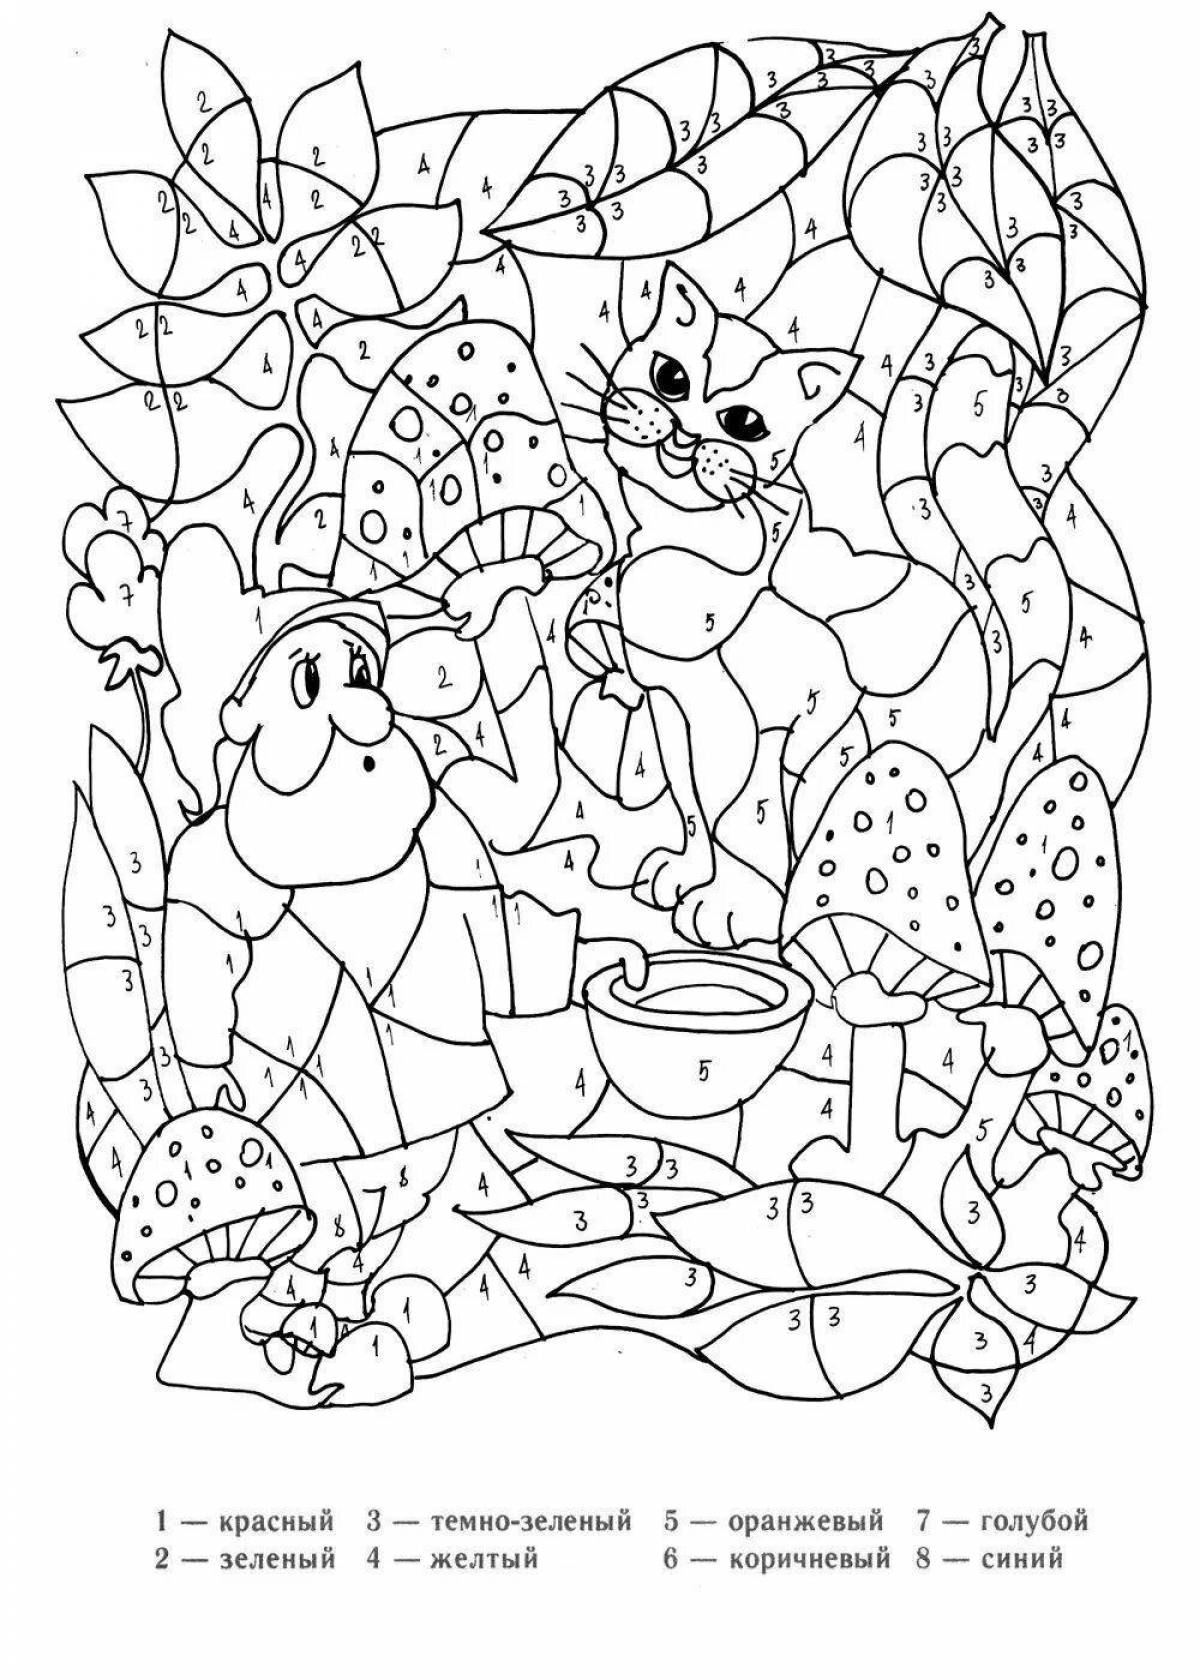 Color crazy download by number coloring book